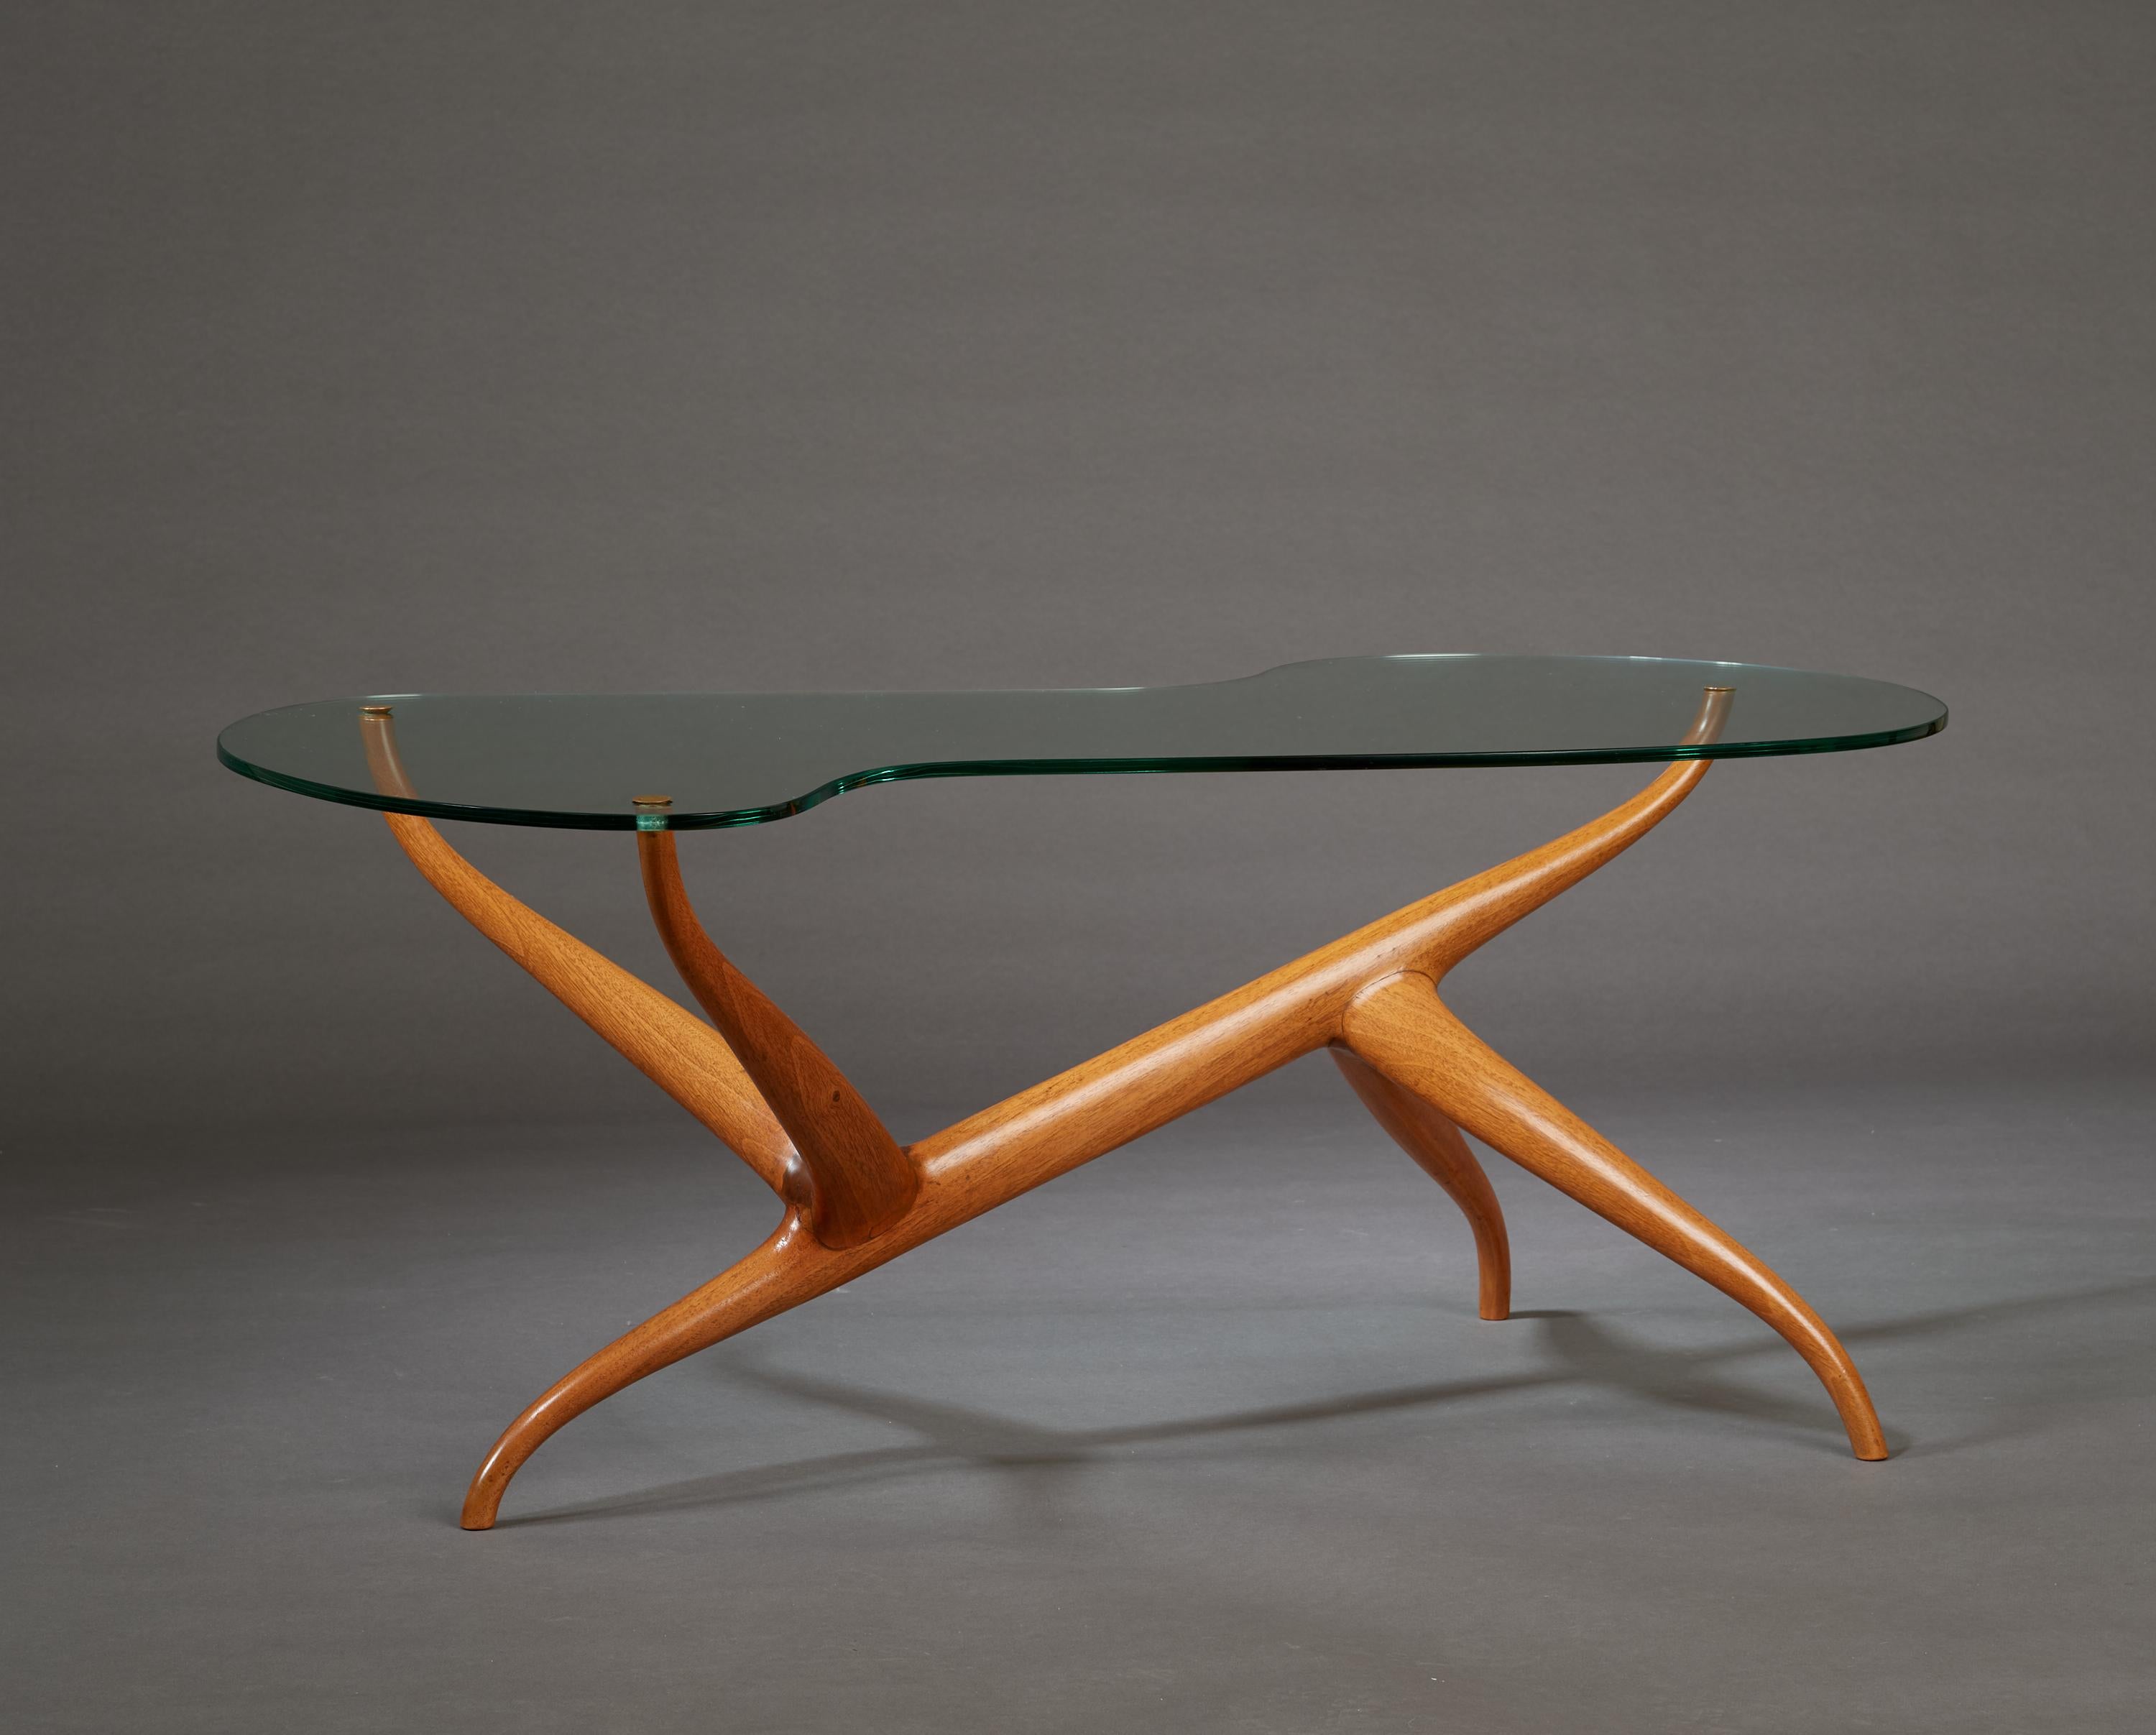 Pierluigi Giordani (1924-2011)

A one of a kind sculptural coffee table by Pierluigi Giordani, and a masterwork of organic abstraction. A biomorphic glass top, inset with delicate brass rivets, floats cloud-like over an asymmetrical blond oak base